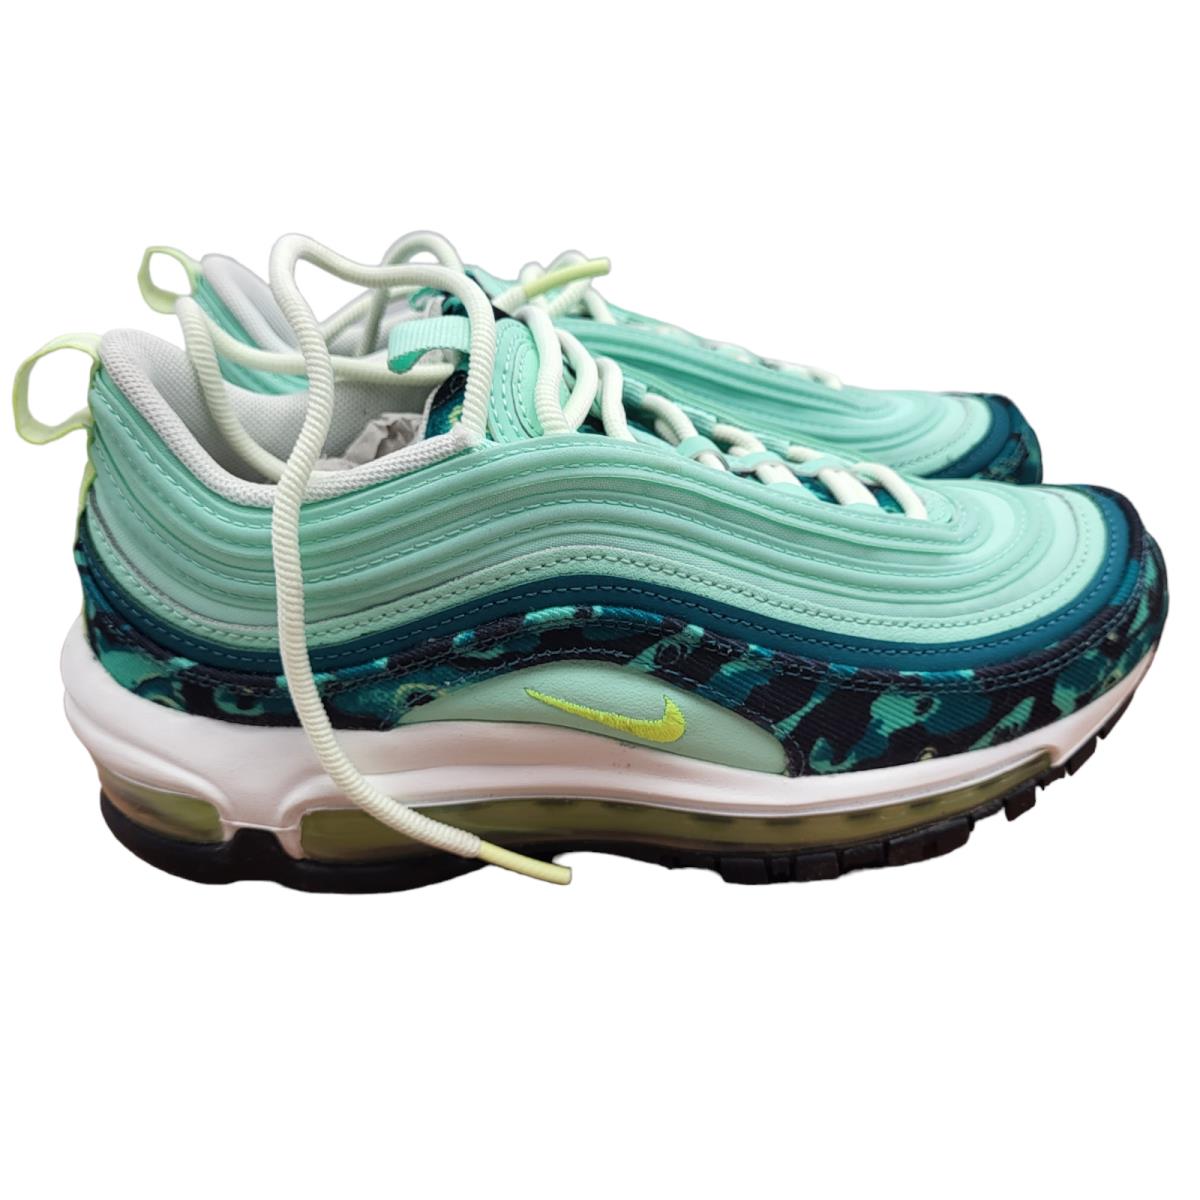 Nike Air Max 97 Sneakers Womens 5.5 Green Camo DX3366-300 Shoes